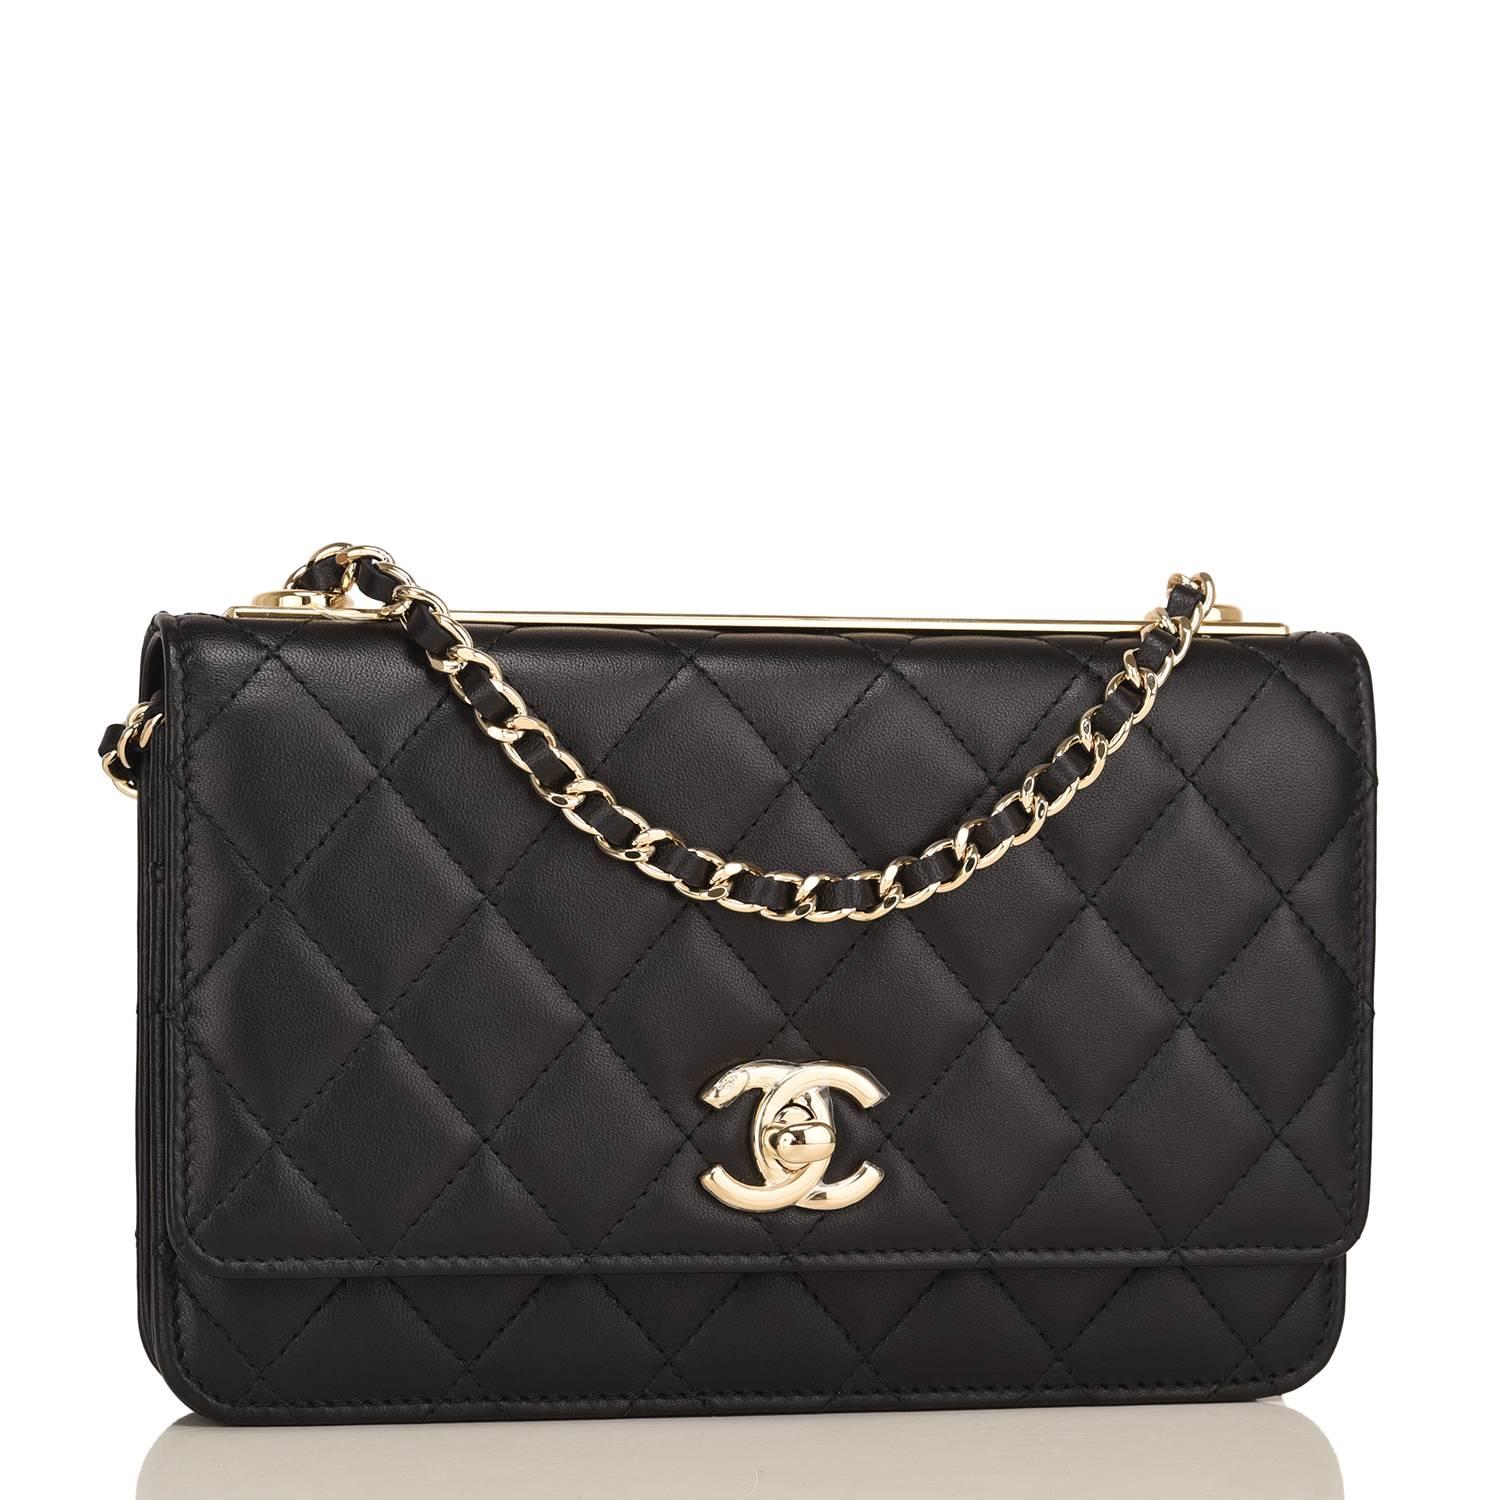 Chanel quilted Trendy CC Wallet on Chain (WOC) of black lambskin leather with gold tone hardware.

This Wallet On Chain features a front flap with the cc turnlock closure, gold plated 